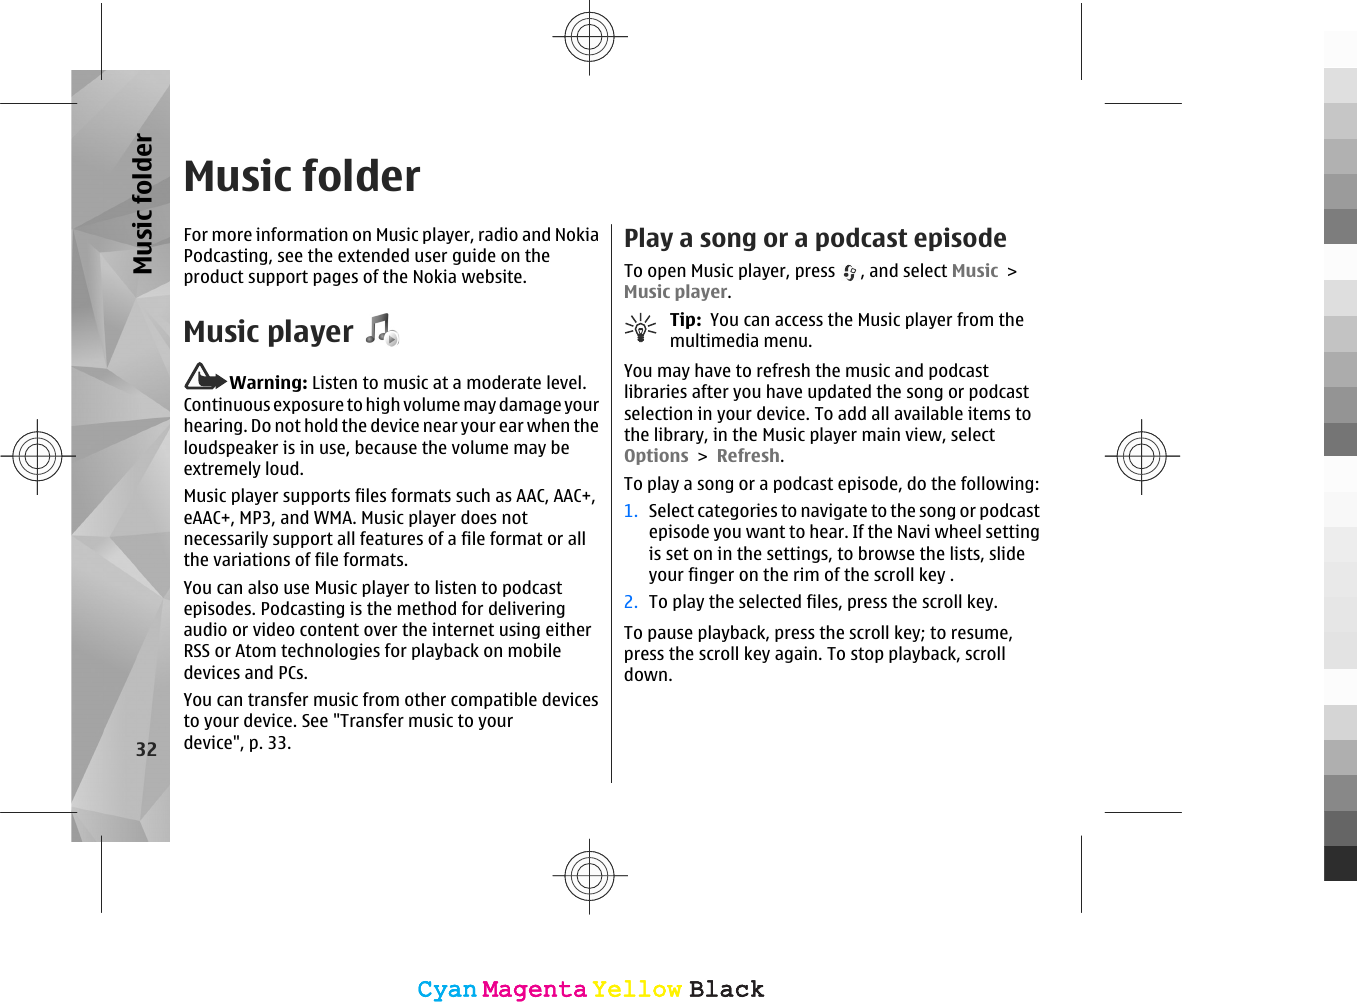 Music folderFor more information on Music player, radio and NokiaPodcasting, see the extended user guide on theproduct support pages of the Nokia website.Music playerWarning: Listen to music at a moderate level.Continuous exposure to high volume may damage yourhearing. Do not hold the device near your ear when theloudspeaker is in use, because the volume may beextremely loud.Music player supports files formats such as AAC, AAC+,eAAC+, MP3, and WMA. Music player does notnecessarily support all features of a file format or allthe variations of file formats.You can also use Music player to listen to podcastepisodes. Podcasting is the method for deliveringaudio or video content over the internet using eitherRSS or Atom technologies for playback on mobiledevices and PCs.You can transfer music from other compatible devicesto your device. See &quot;Transfer music to yourdevice&quot;, p. 33.Play a song or a podcast episodeTo open Music player, press  , and select Music &gt;Music player.Tip:  You can access the Music player from themultimedia menu.You may have to refresh the music and podcastlibraries after you have updated the song or podcastselection in your device. To add all available items tothe library, in the Music player main view, selectOptions &gt; Refresh.To play a song or a podcast episode, do the following:1. Select categories to navigate to the song or podcastepisode you want to hear. If the Navi wheel settingis set on in the settings, to browse the lists, slideyour finger on the rim of the scroll key .2. To play the selected files, press the scroll key.To pause playback, press the scroll key; to resume,press the scroll key again. To stop playback, scrolldown.32Music folderCyanCyanMagentaMagentaYellowYellowBlackBlackCyanCyanMagentaMagentaYellowYellowBlackBlack